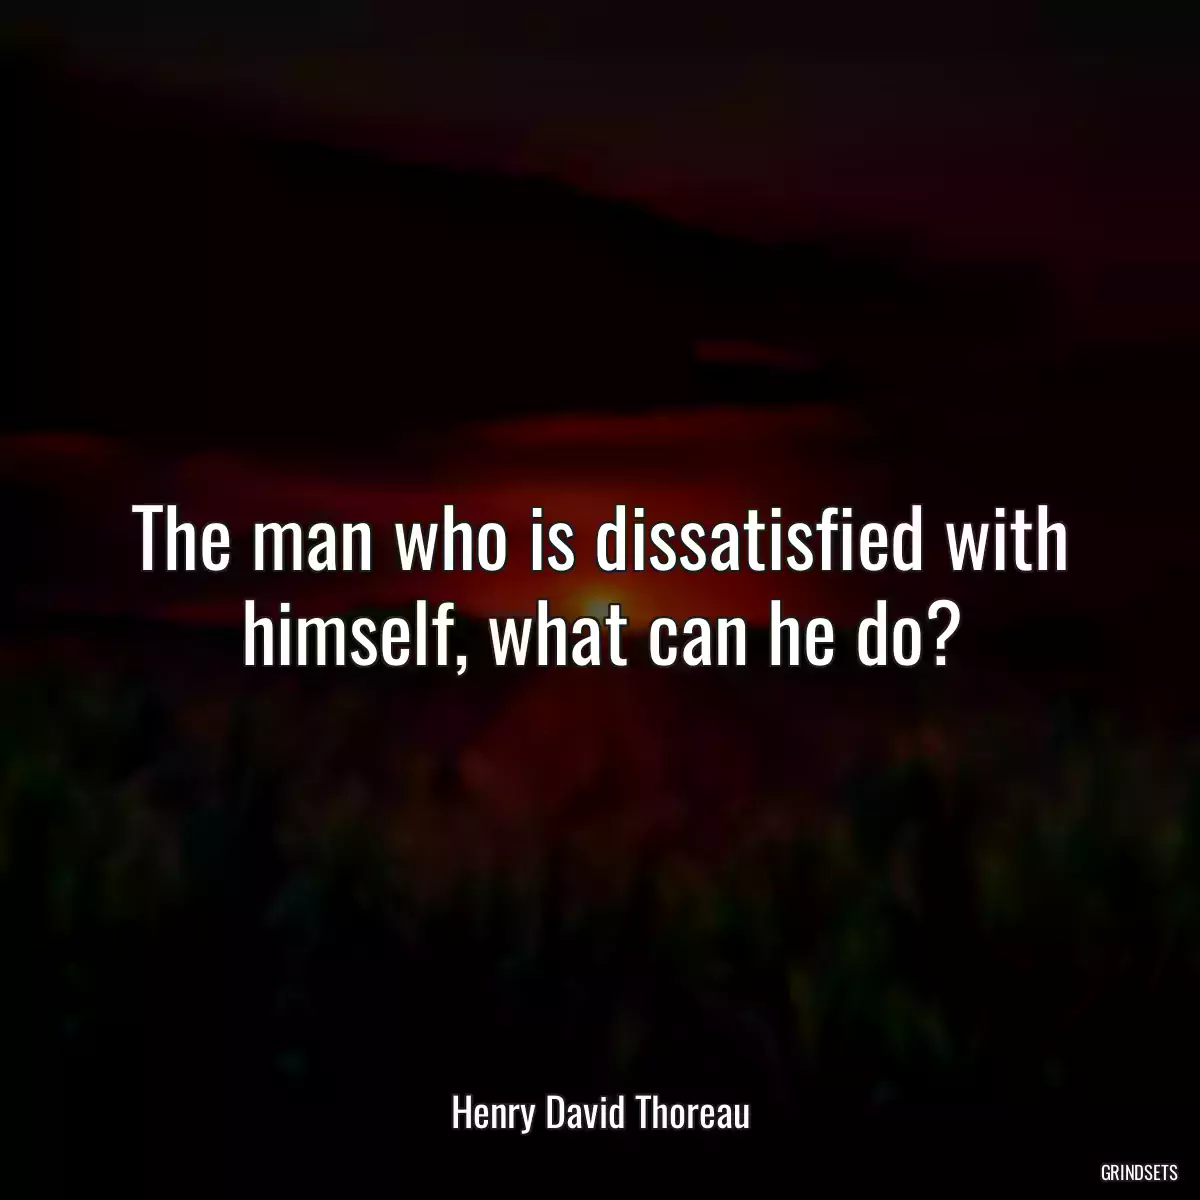 The man who is dissatisfied with himself, what can he do?